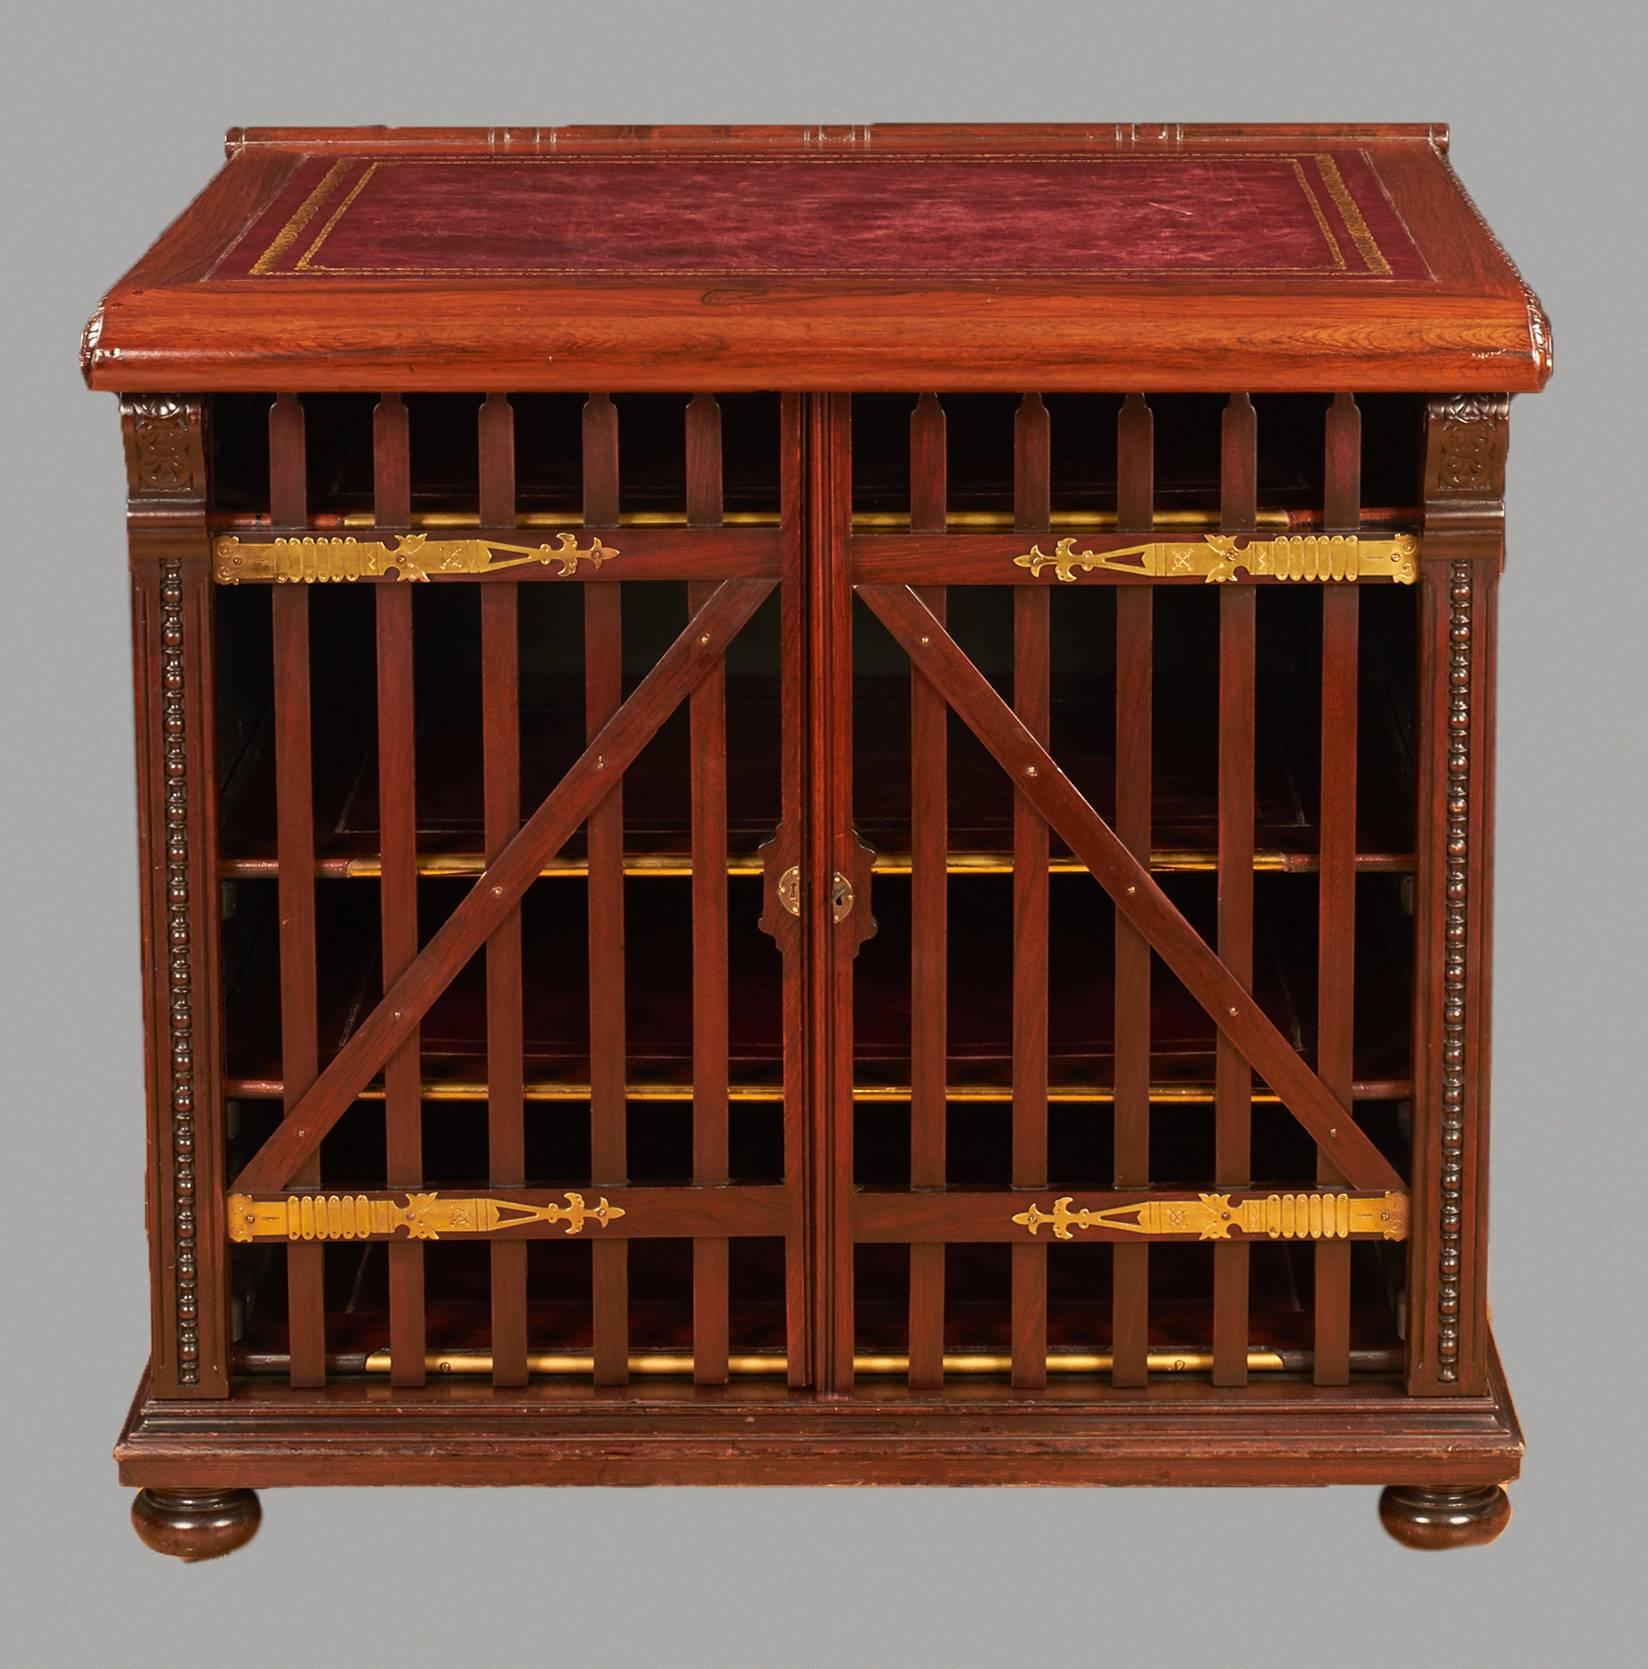 An unusual English rosewood library folio cabinet, the burgundy gilt-tooled inset leather lined top opening to a well, above four leather lined shelves enclosed by a pair of brass-mounted gate form doors, the sides and back with figured panels